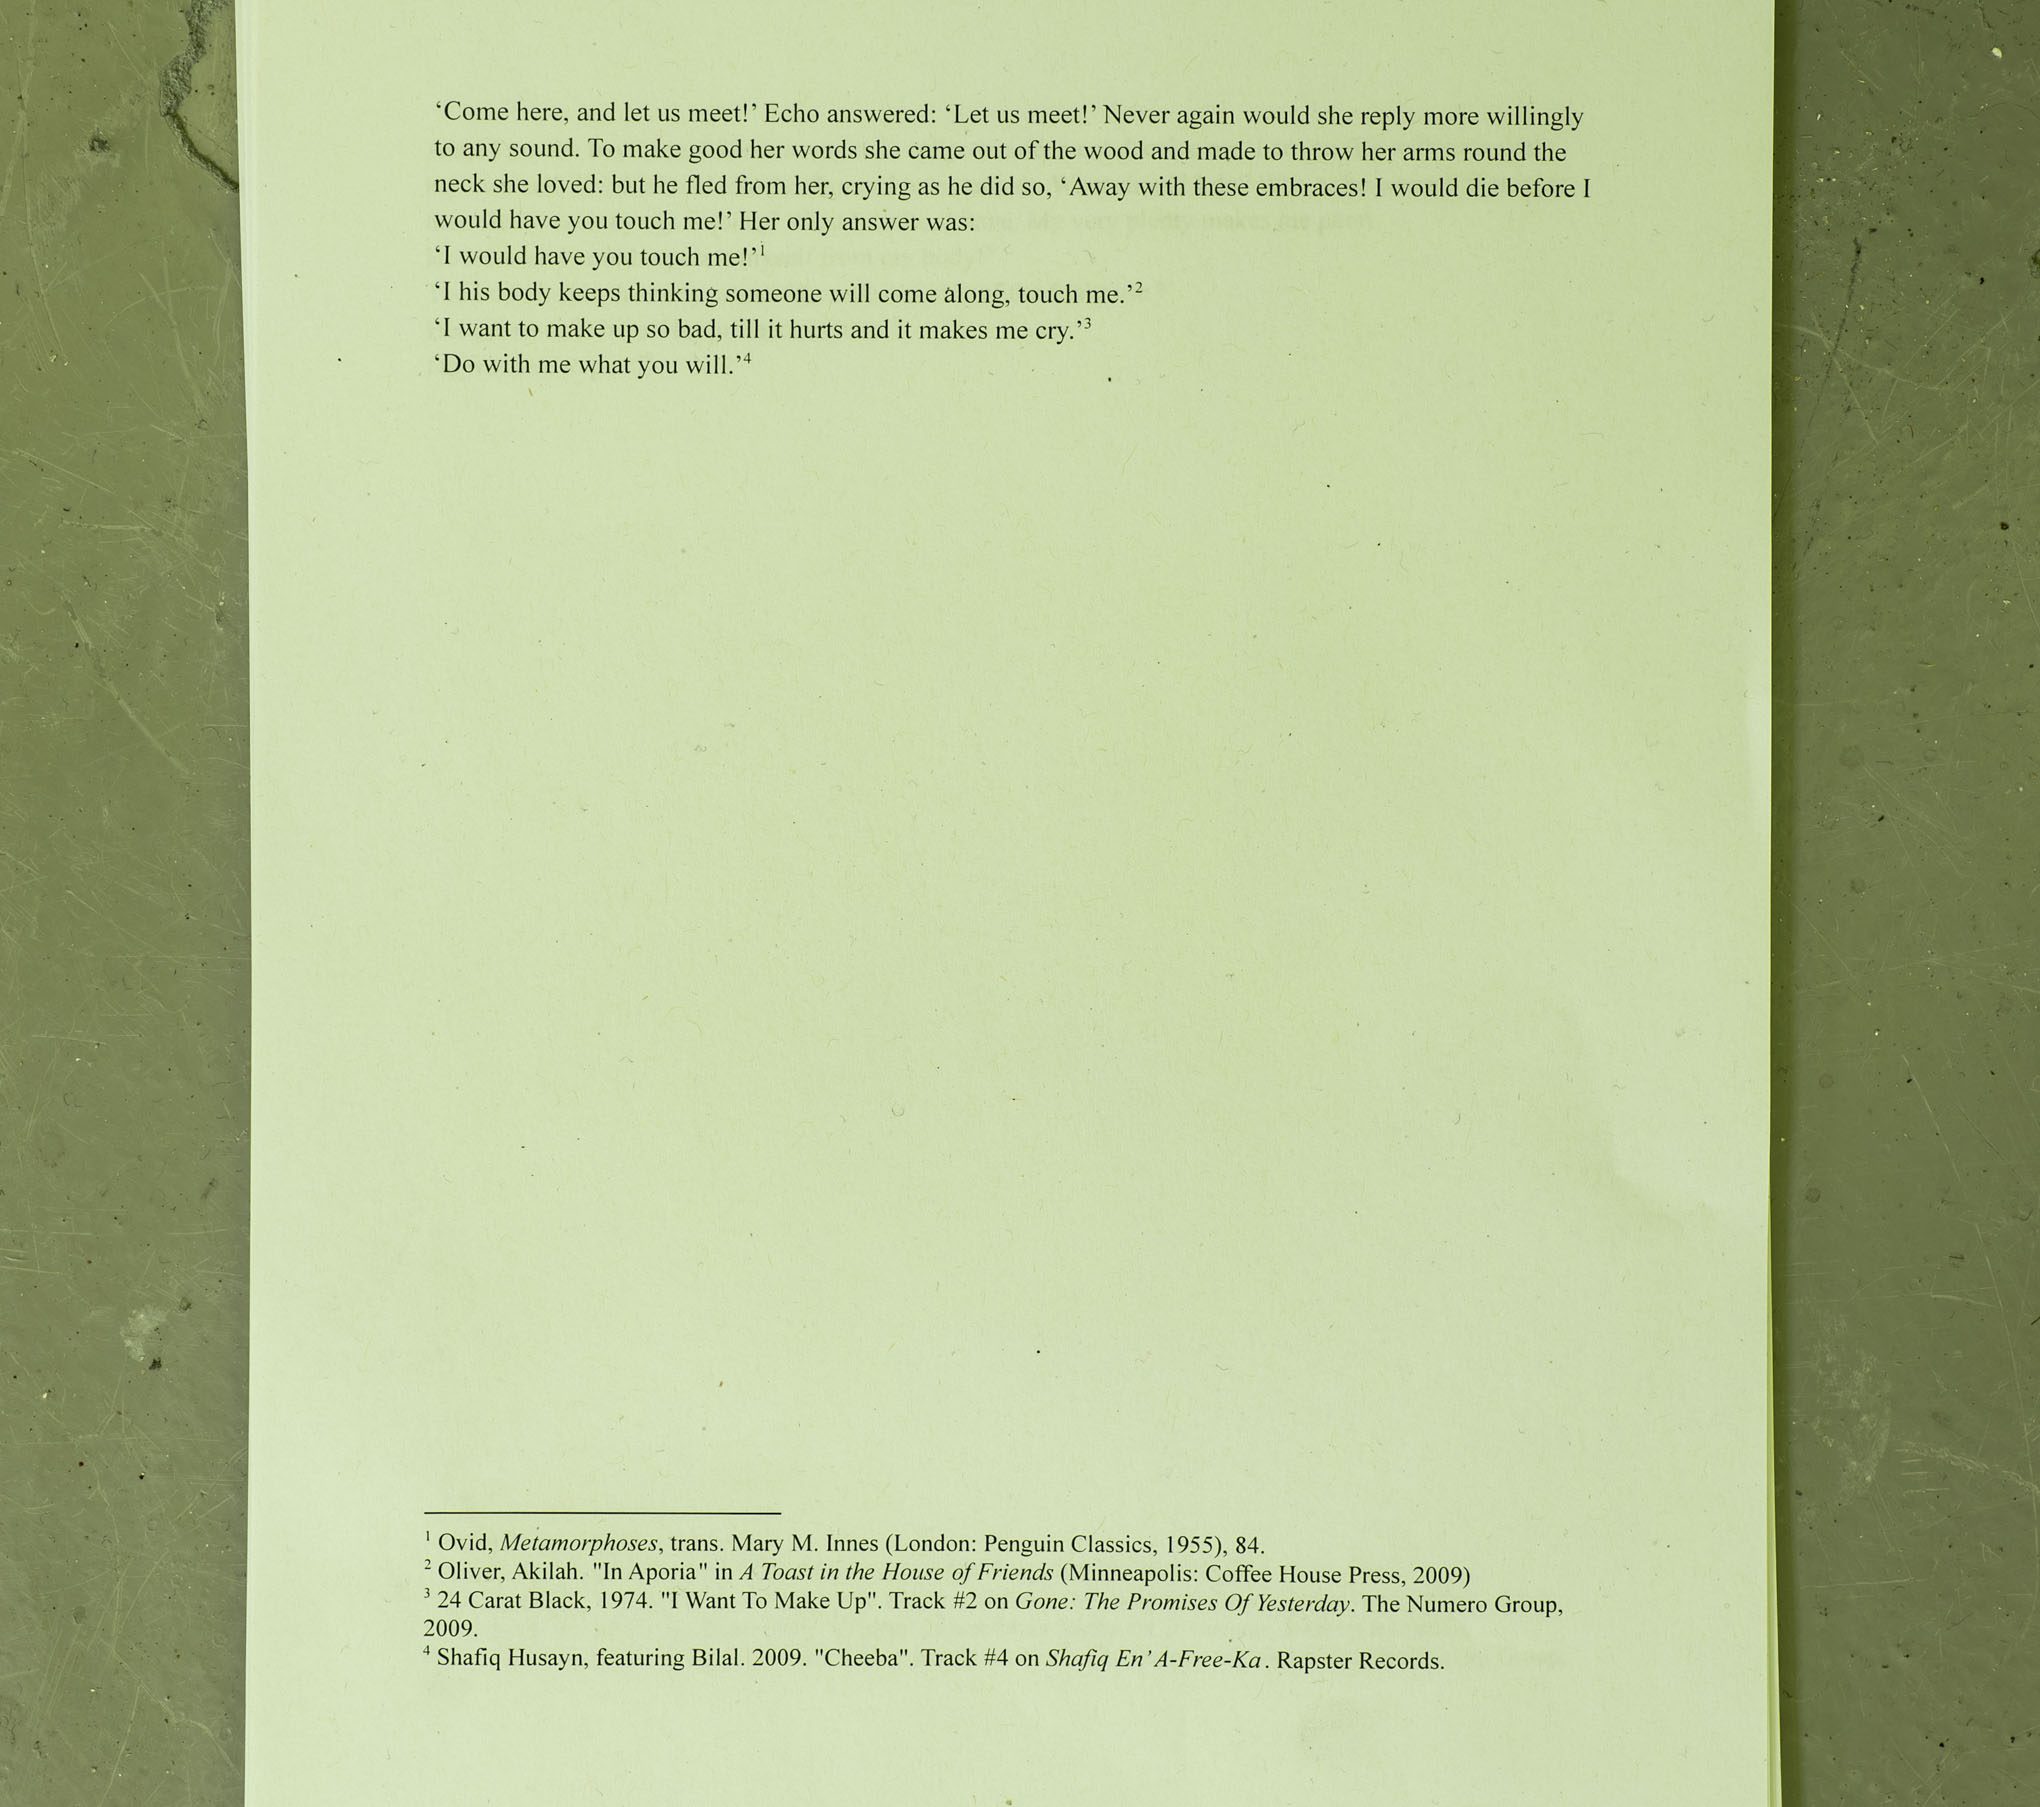 Texts printed on A4 as part of "It’s the only way to touch the distance", Monique Todd, 2022